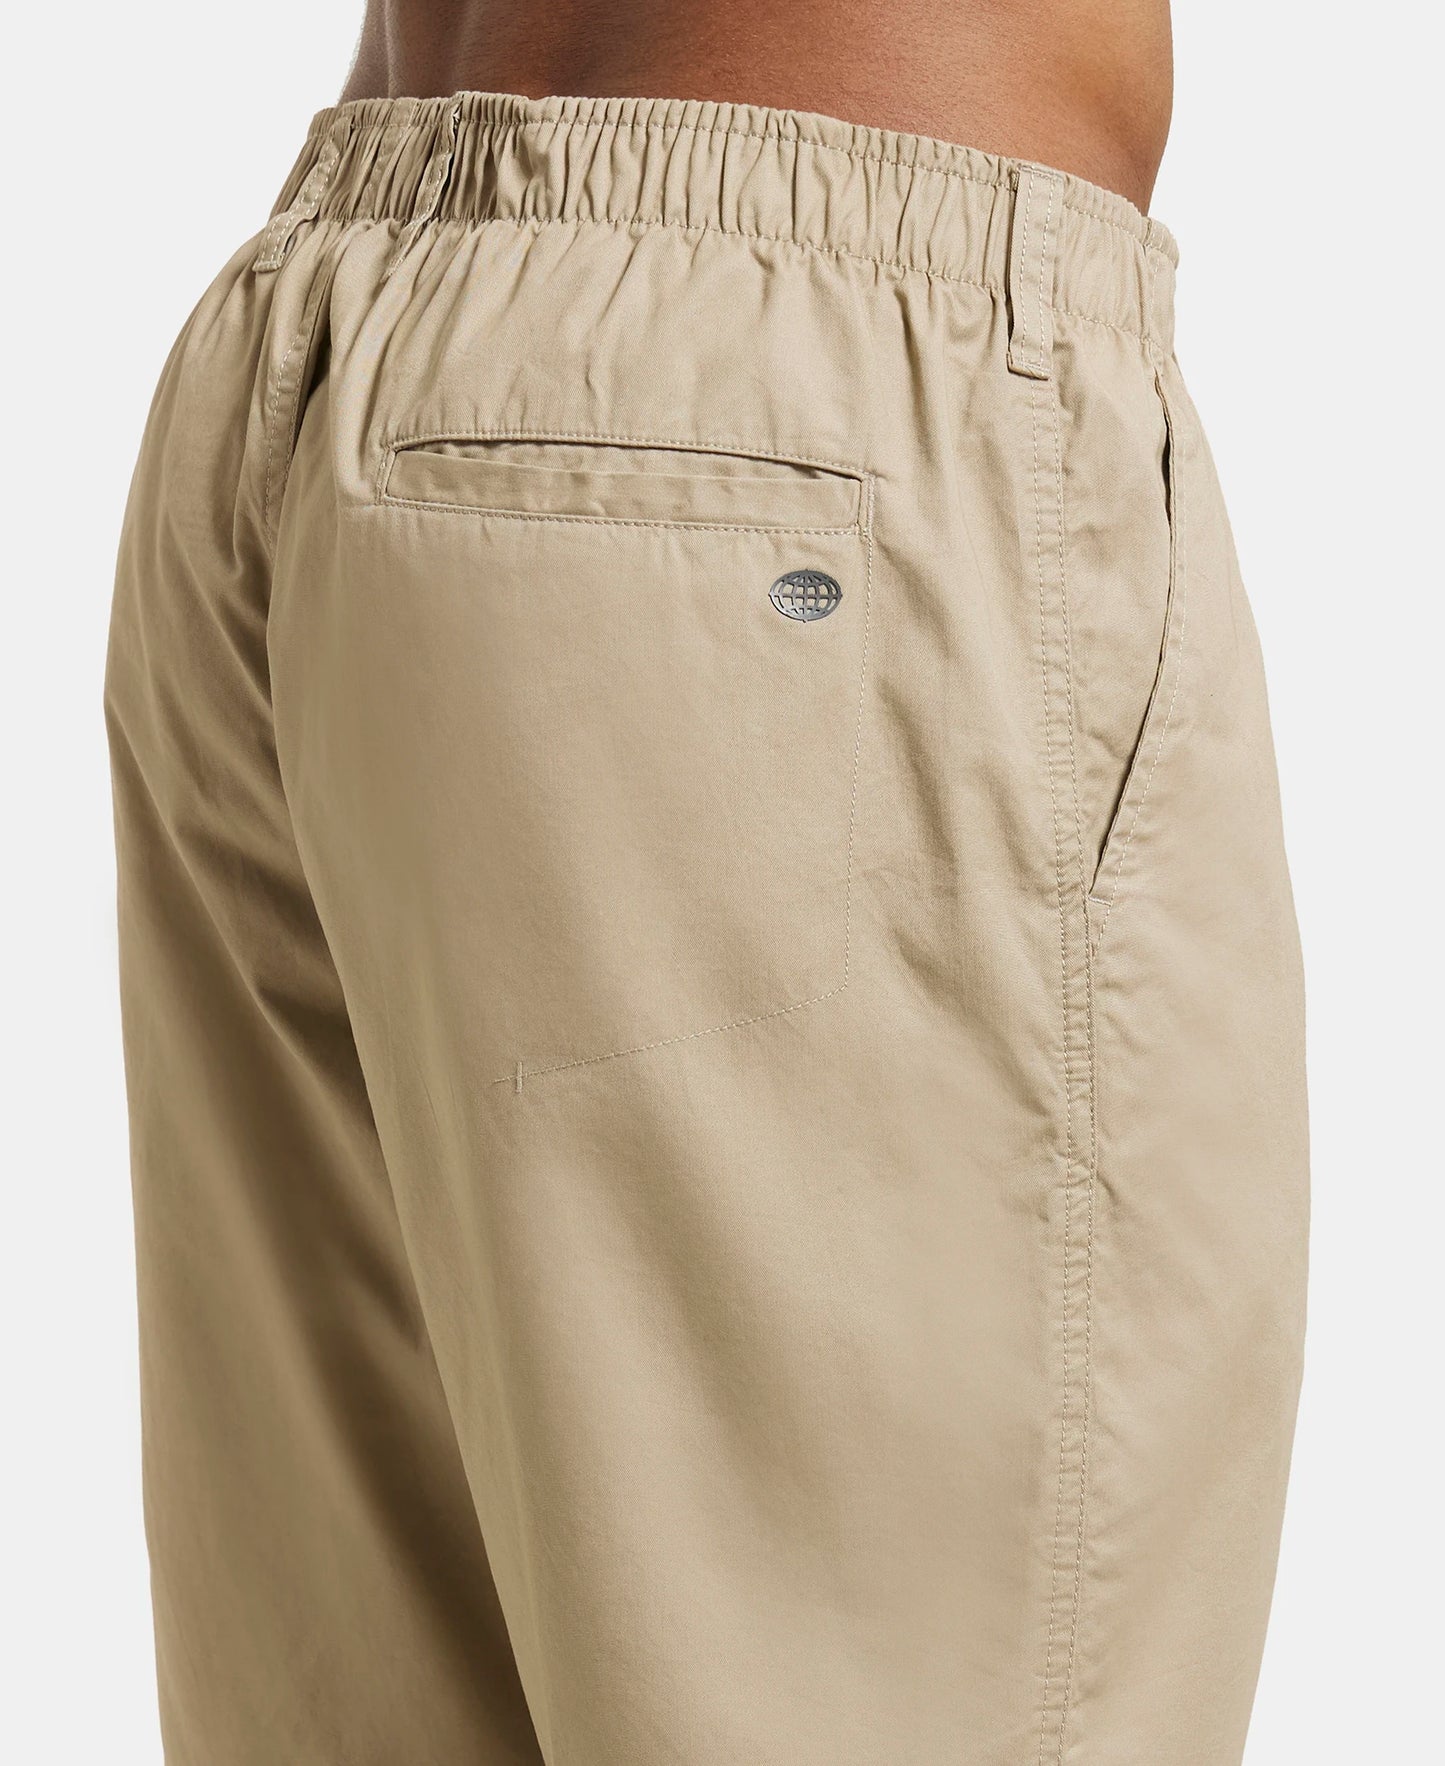 Super Combed Mercerised Cotton Woven Straight Fit Shorts with Side Pockets - Khaki-7